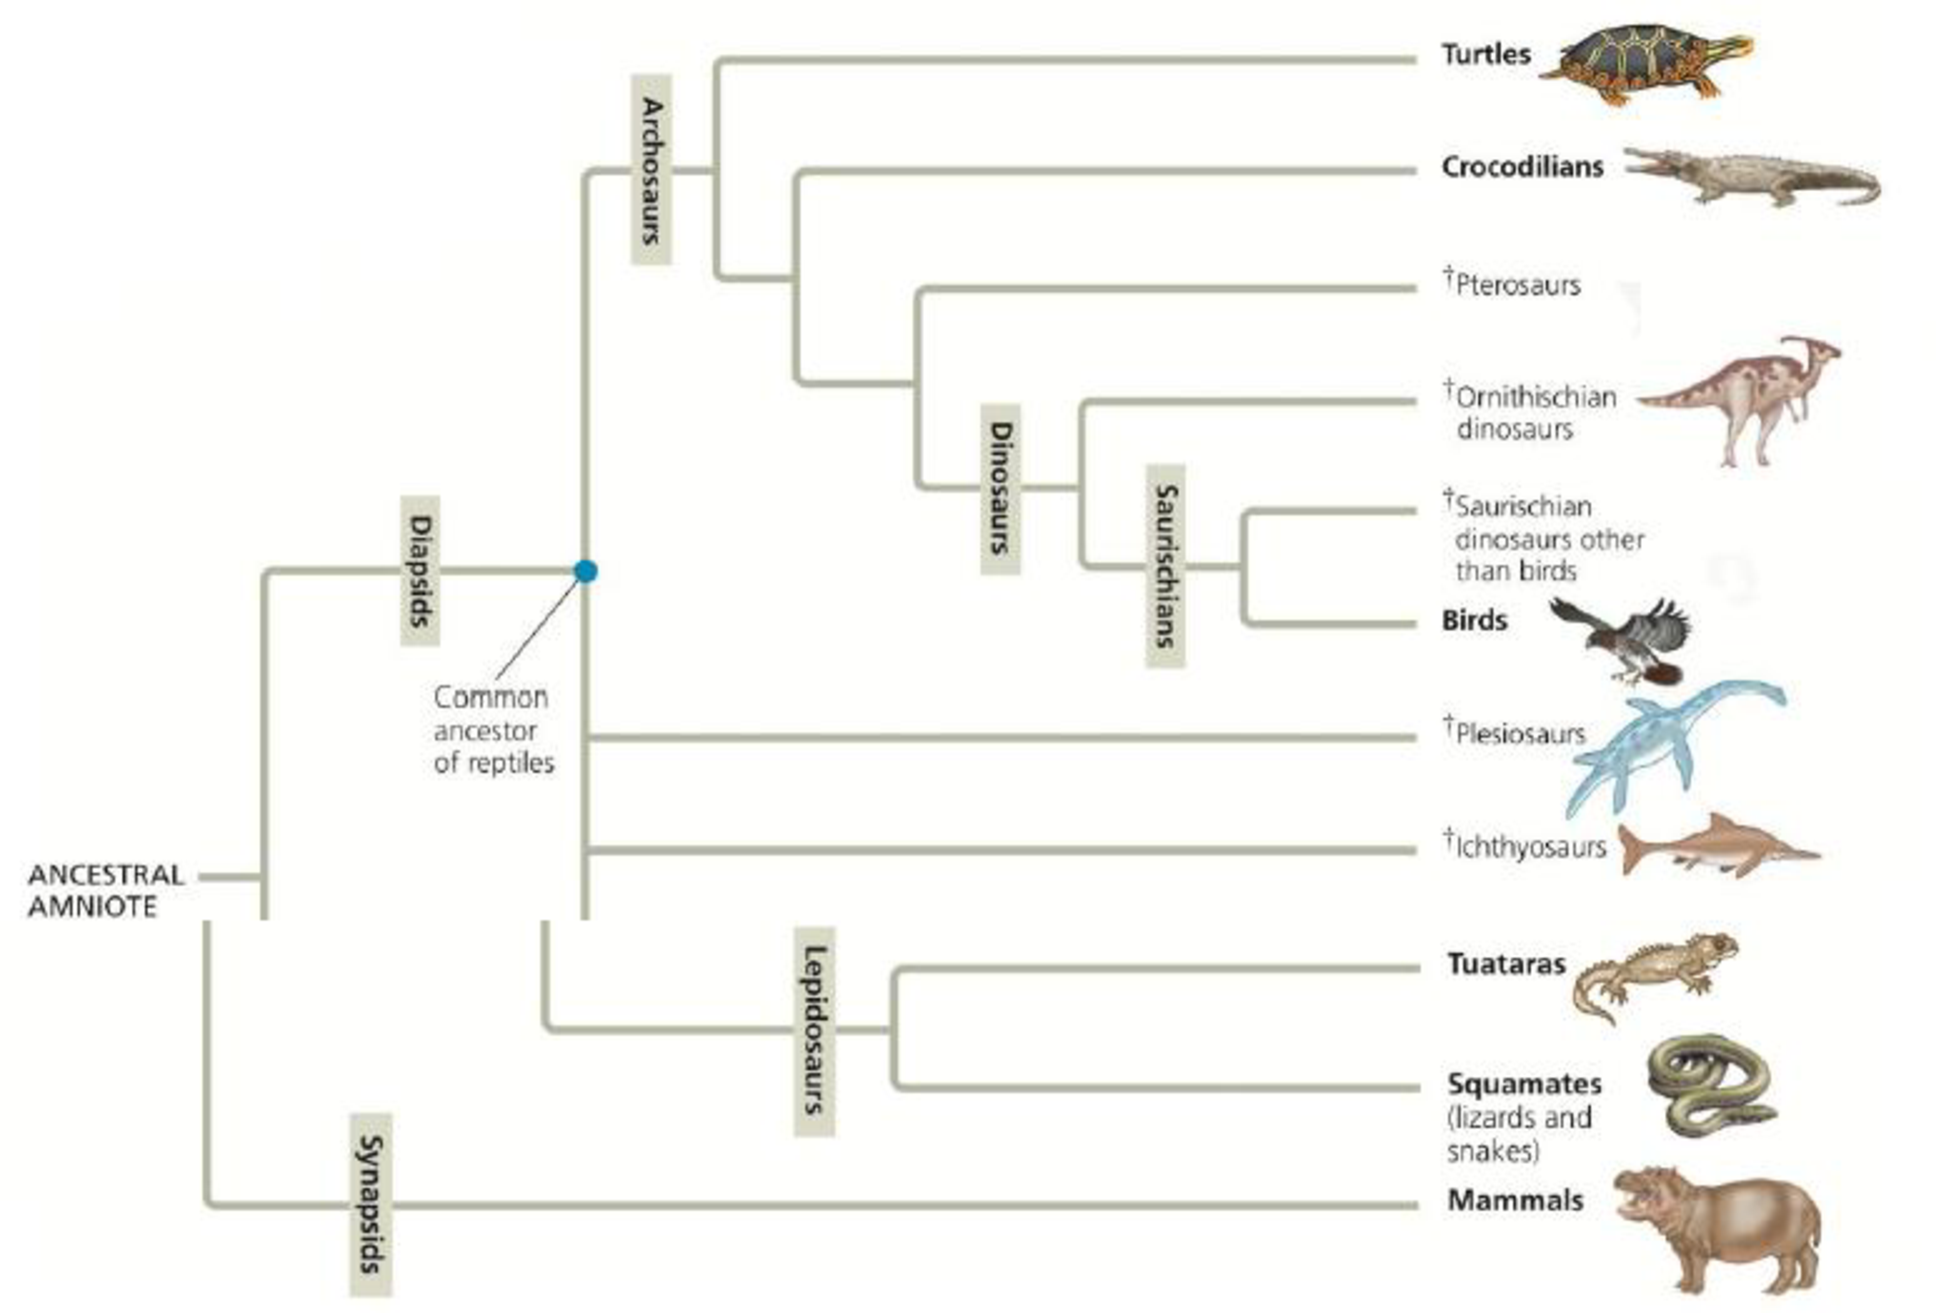 Chapter 34.5, Problem 4CC, VISUAL SKILLS  Based on the phylogeny shown in Figure 34.25, identify the sister group for (a) 